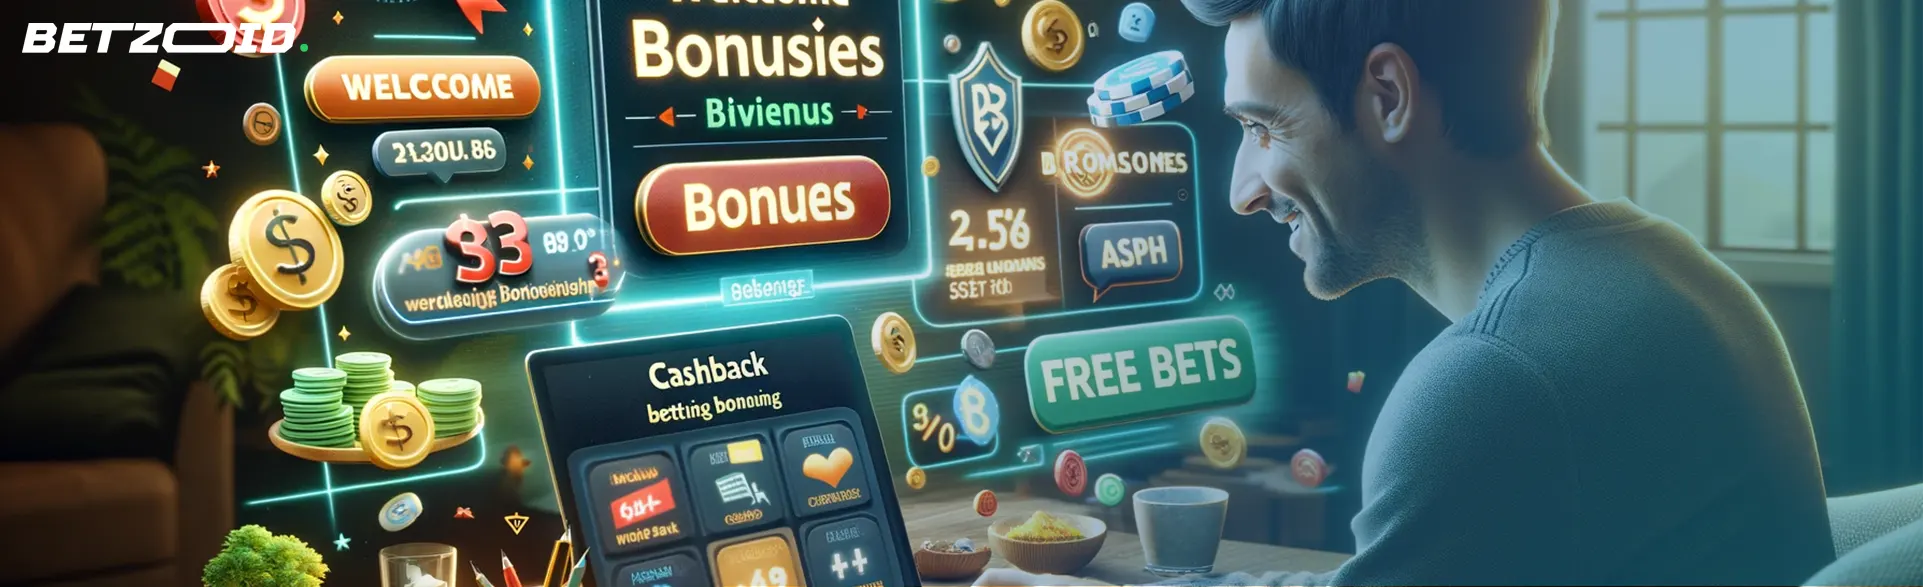 Man exploring bonuses in PayU betting sites, including welcome bonuses, cashback, and free bets.